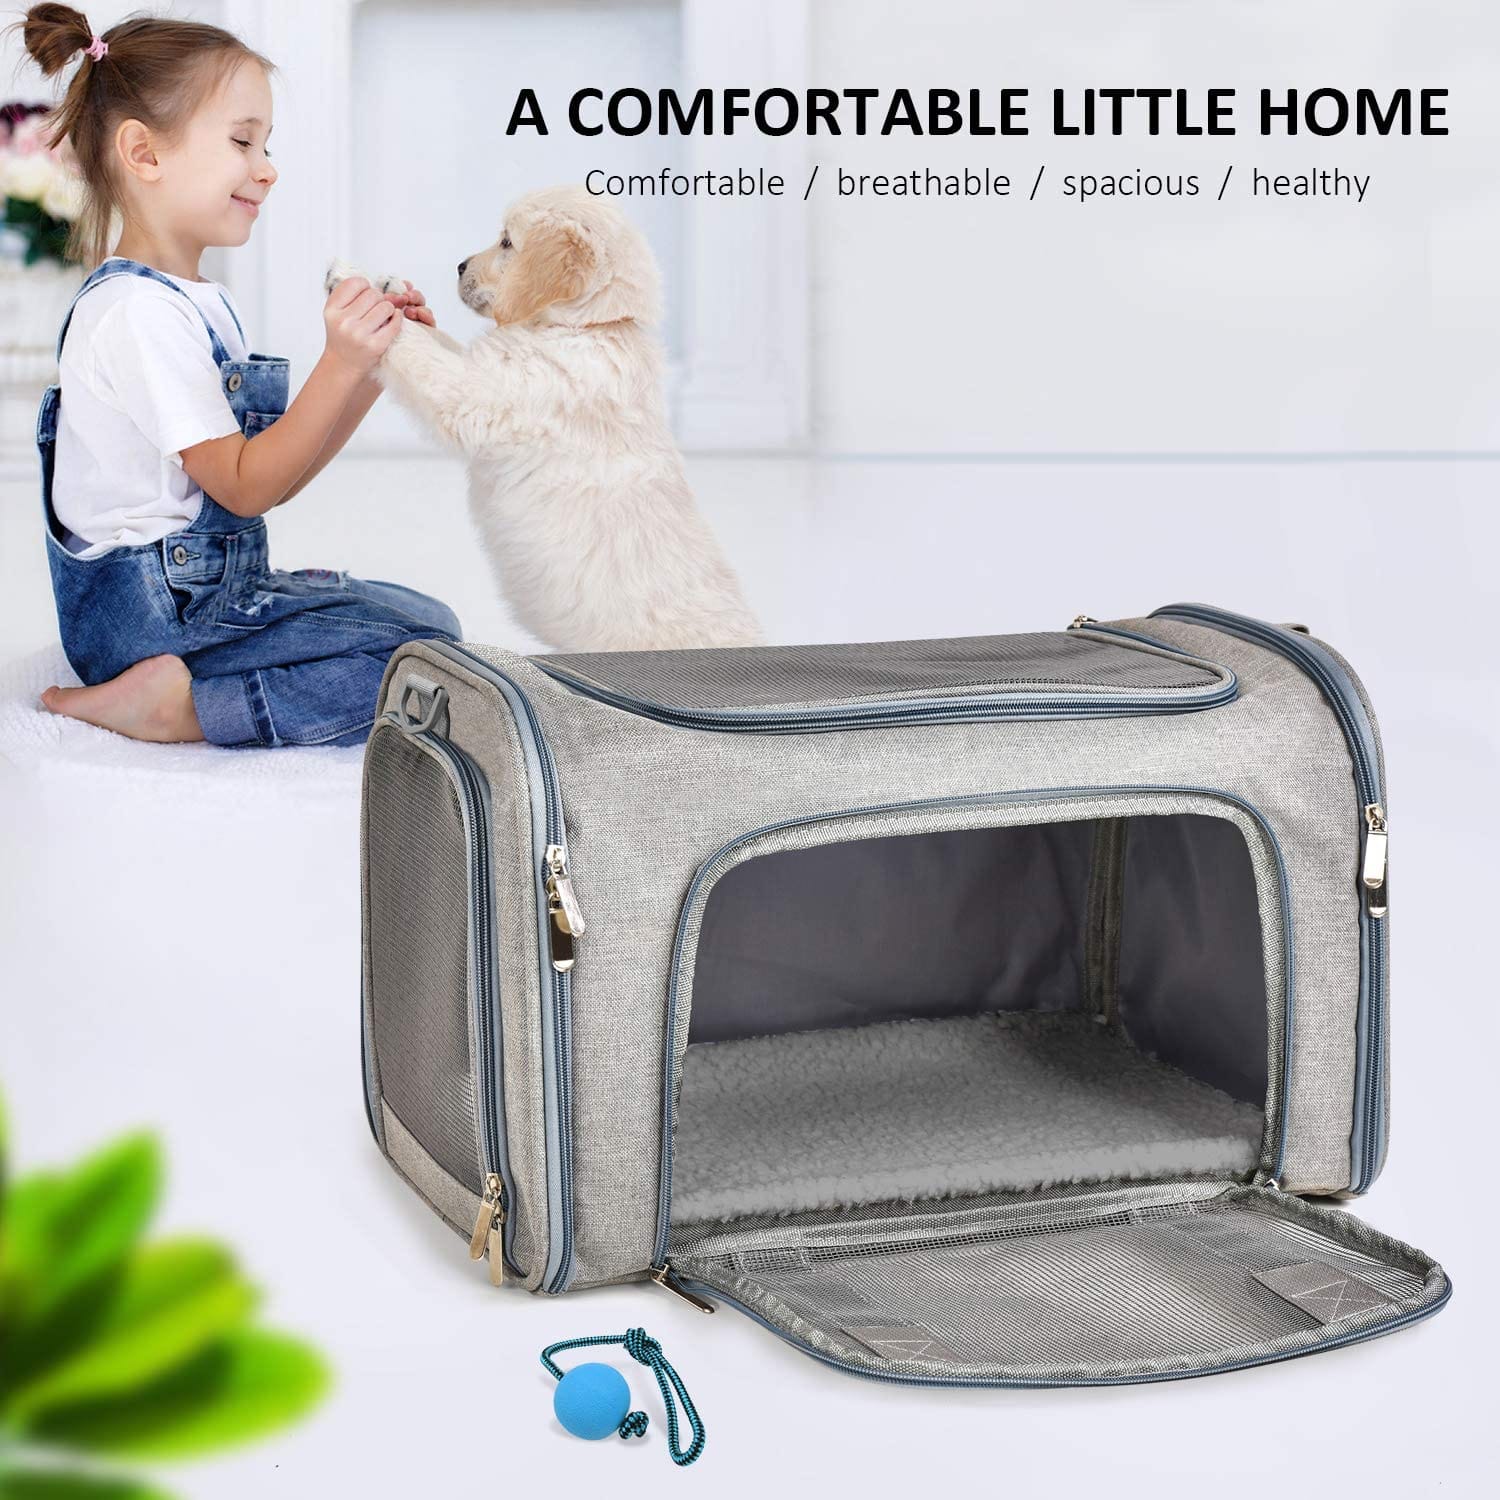 MASKEYON Airline Approved Large Soft-Sided Collapsible Pet Travel Carrier for Dog Puppy,Cats,2 Kitty,Portable Dog Travel Carrier with 5 Doors,3 Storage Pockets,Removable Pads